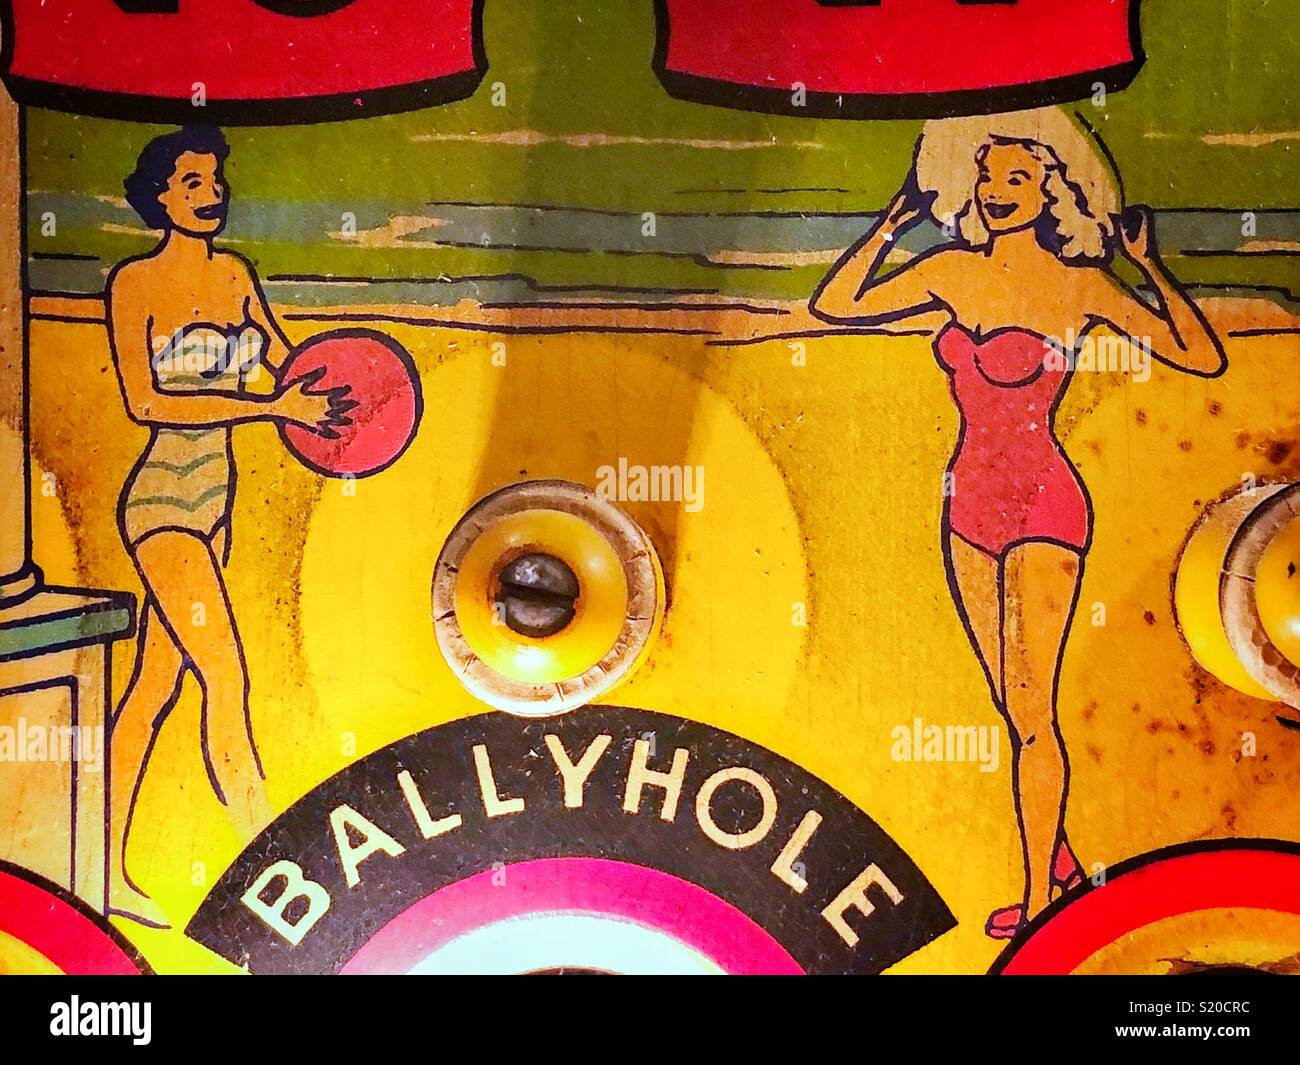 Detail of two pinup girls painted on vintage pinball machine Stock Photo